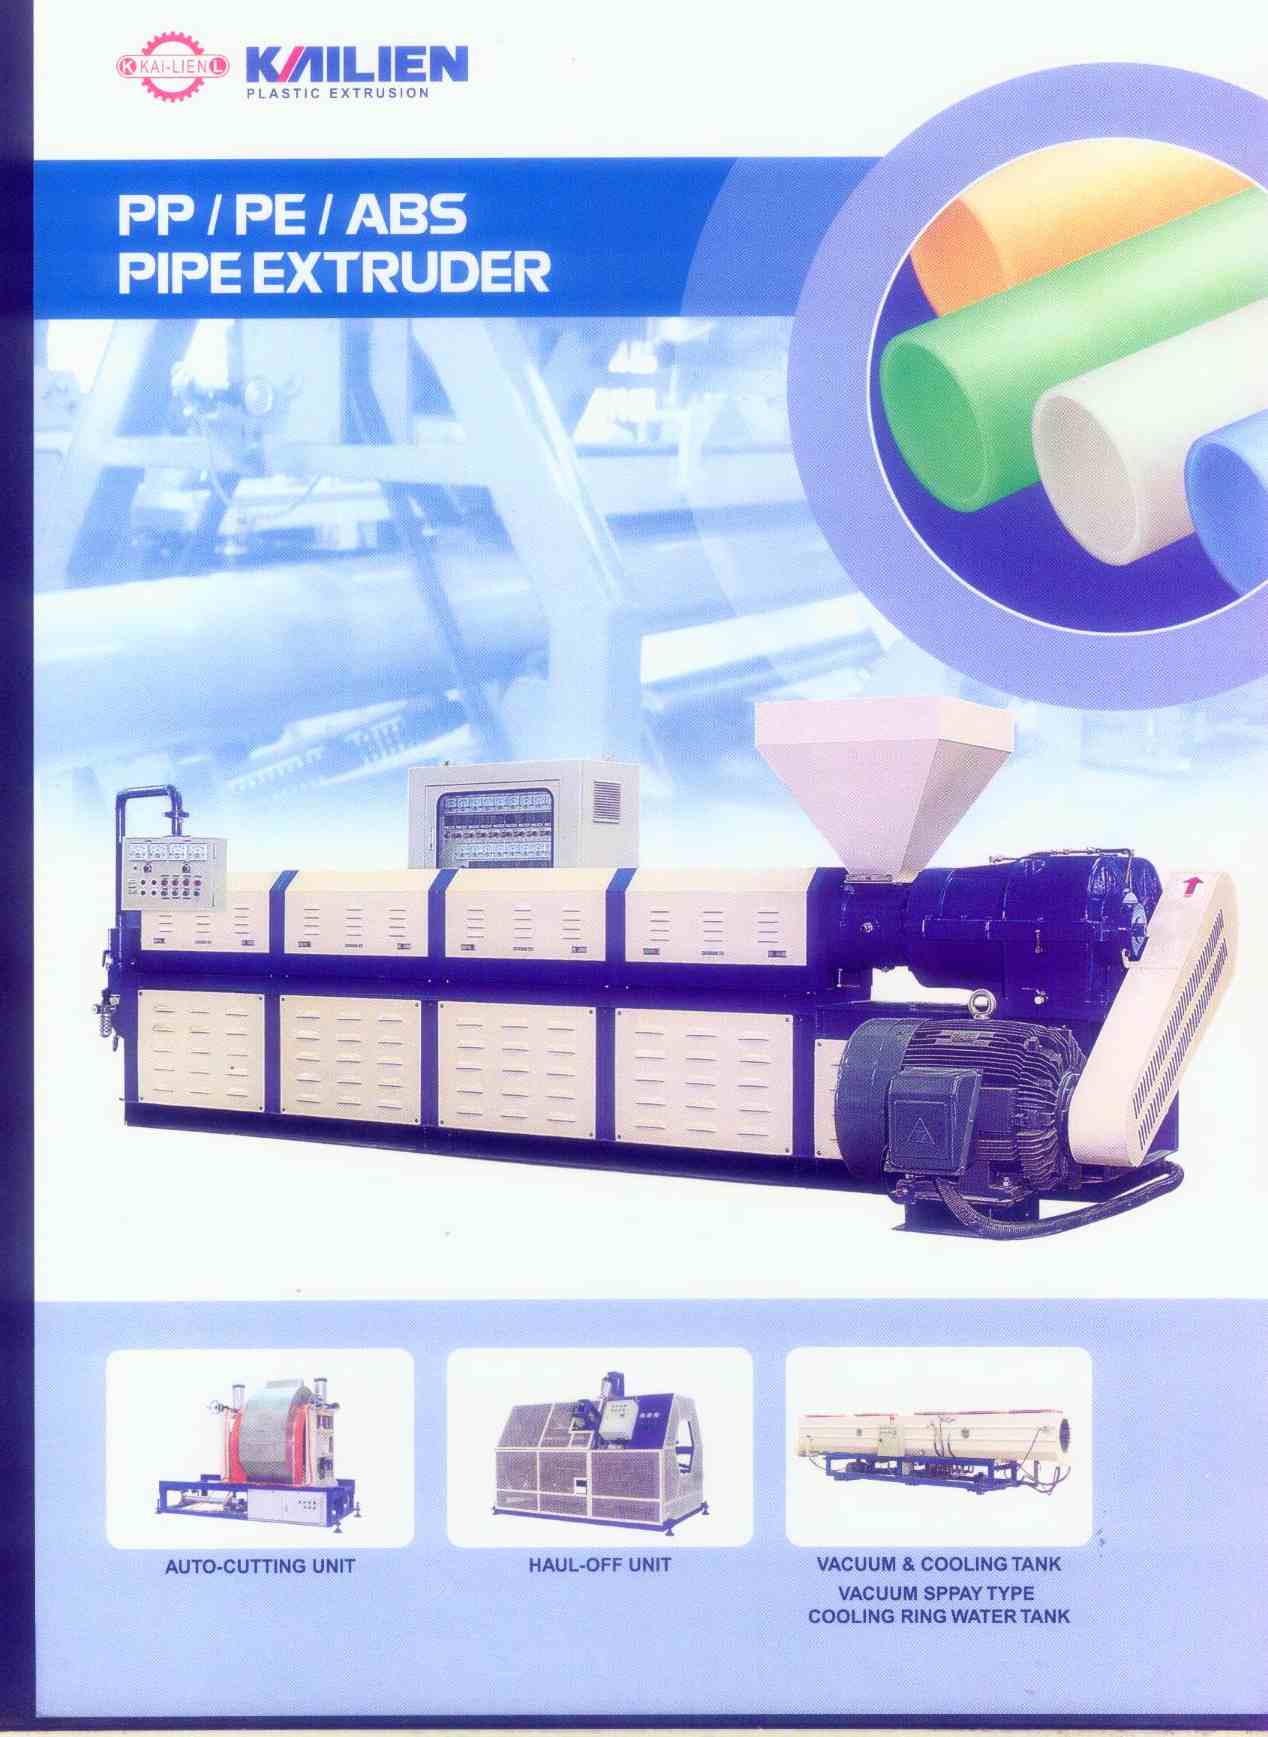 PP - PE - ABS Pipe Extruders